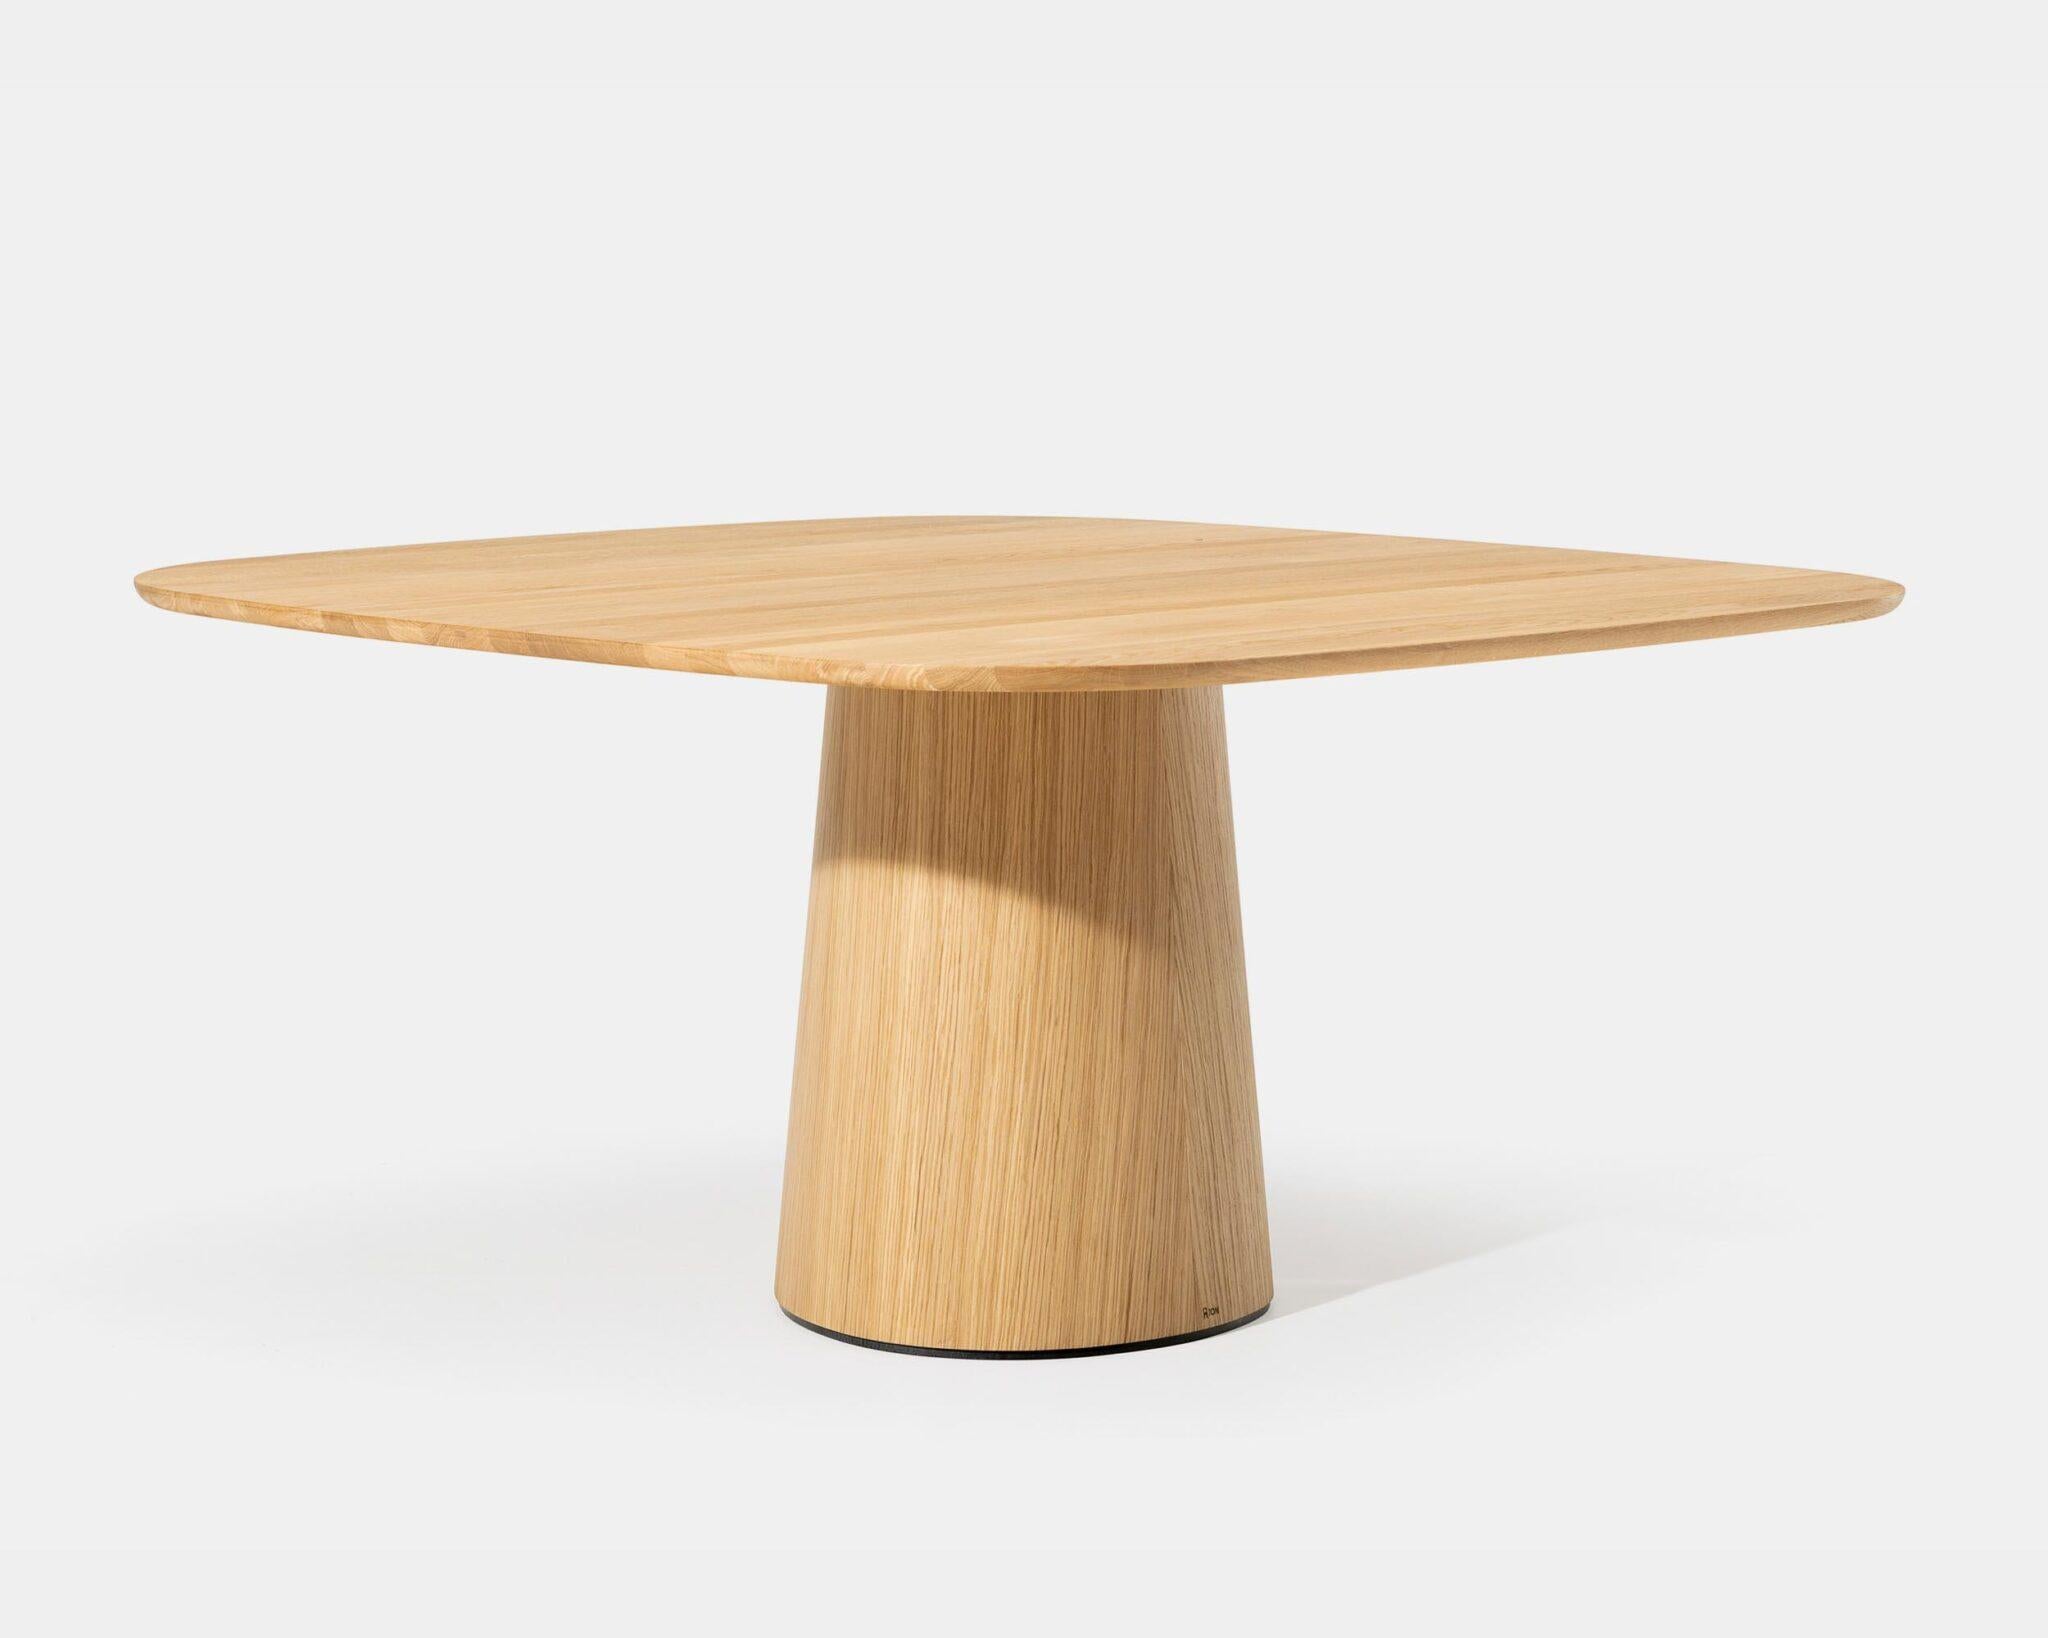 Scandinavian Modern Contemporary Dining Table POV 462, Solid Oak or Walnut, Round or Square, 150 For Sale